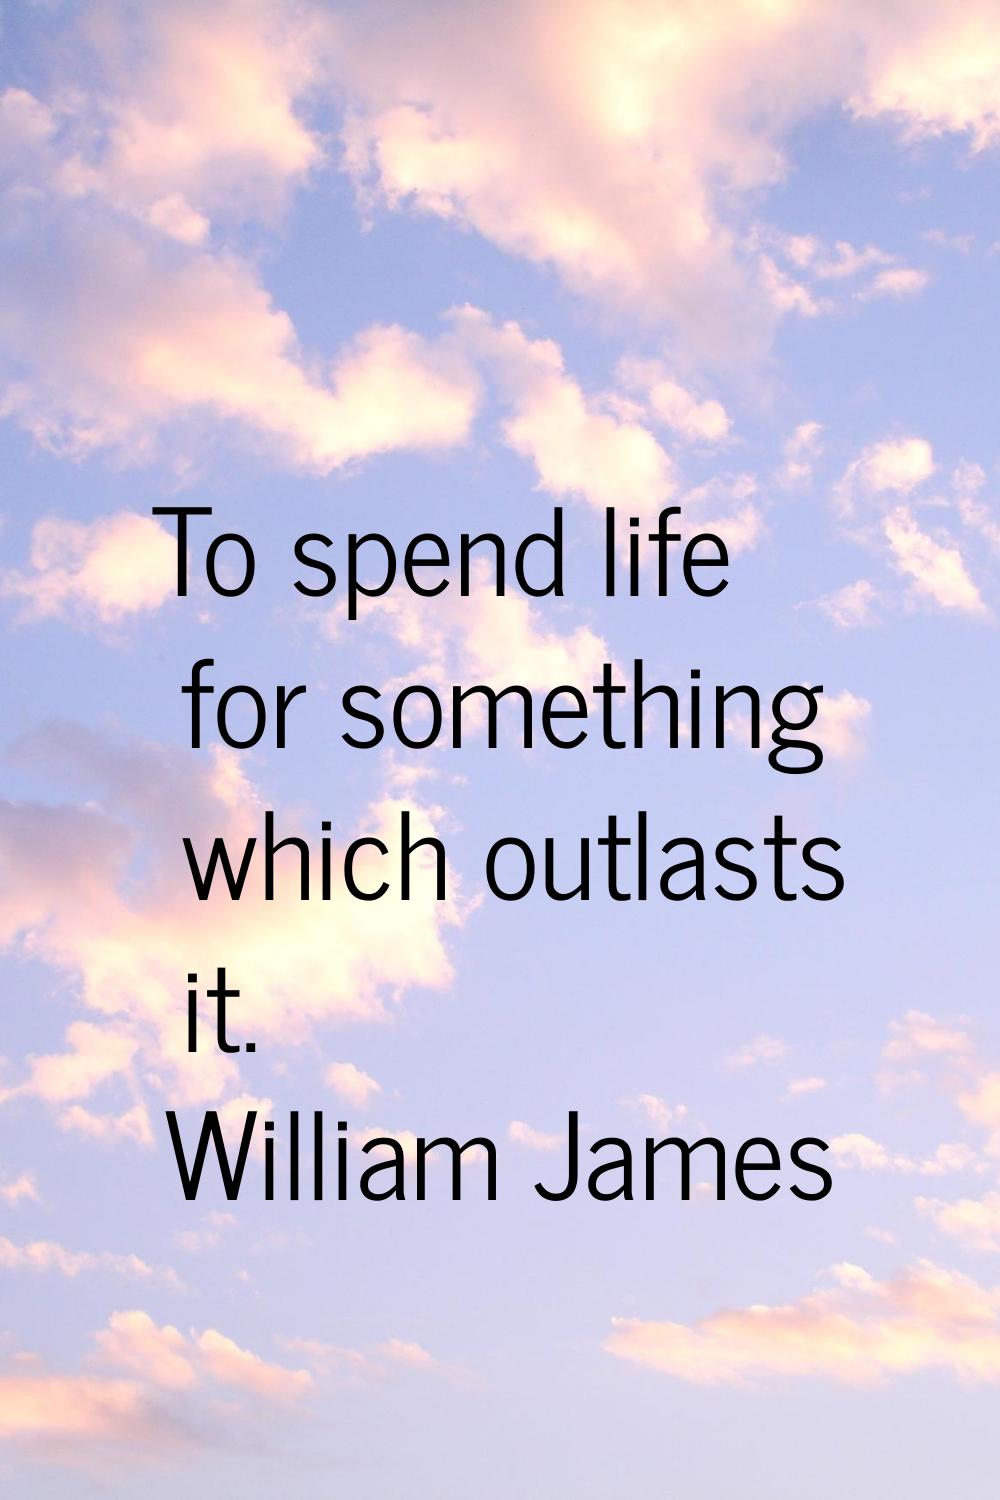 To spend life for something which outlasts it.